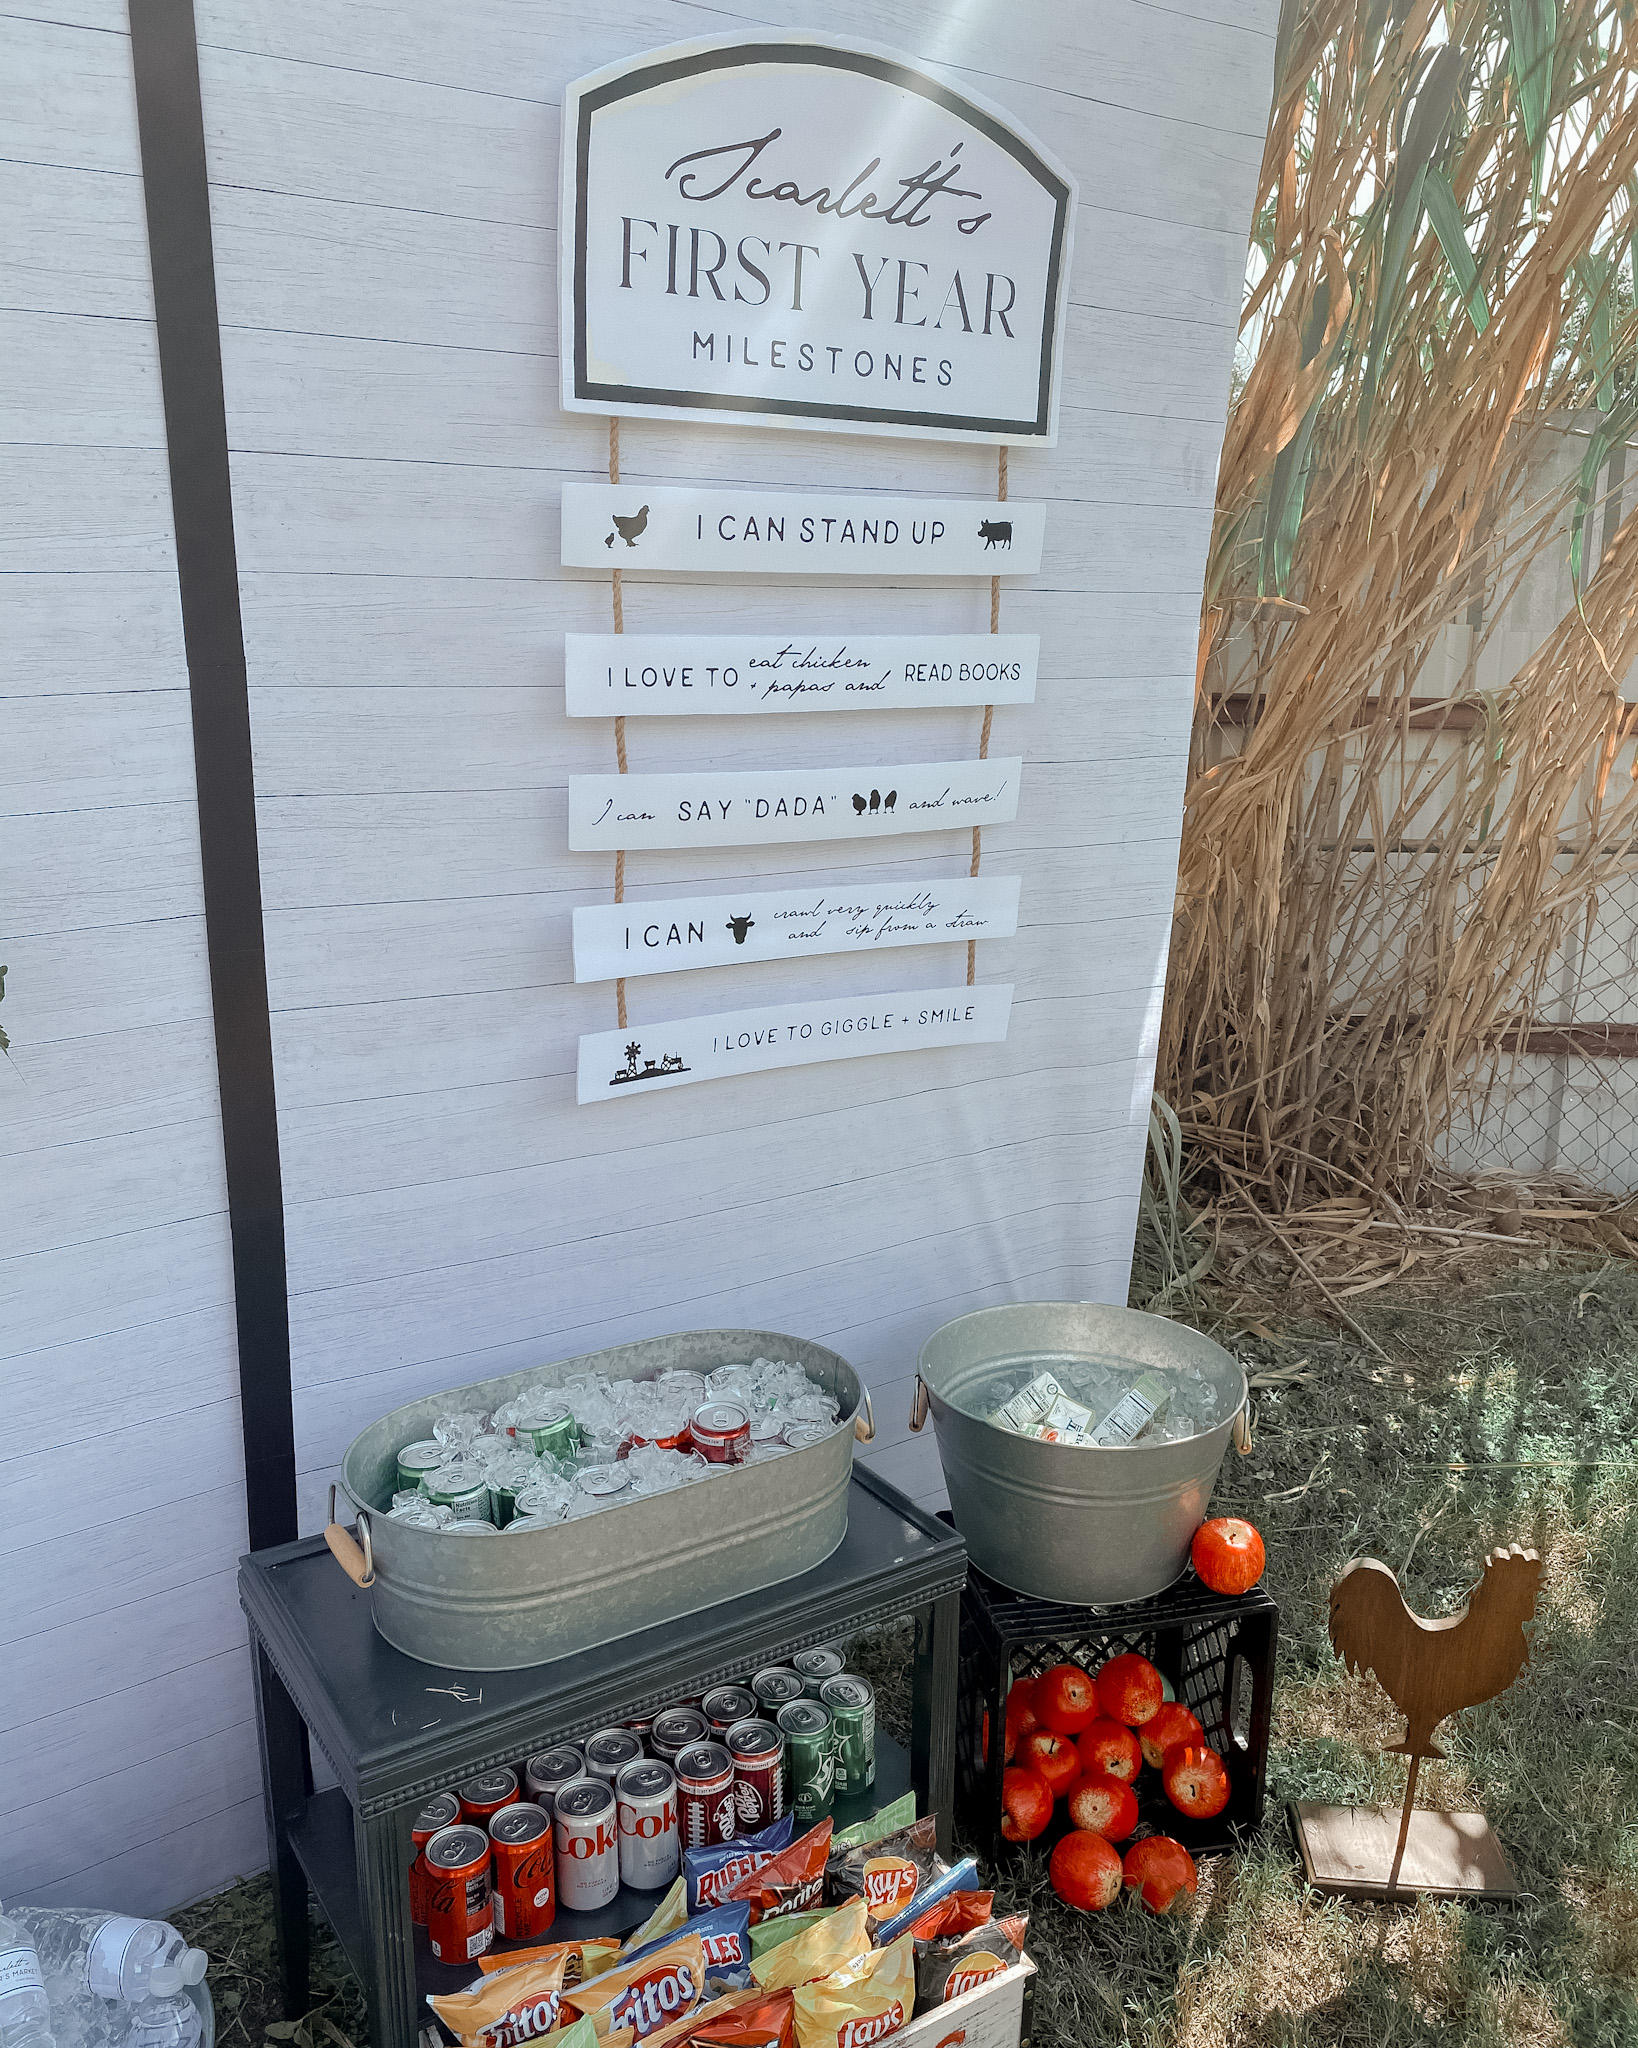 Newborn to 1st year milestone display for the farmers market first birthday party!